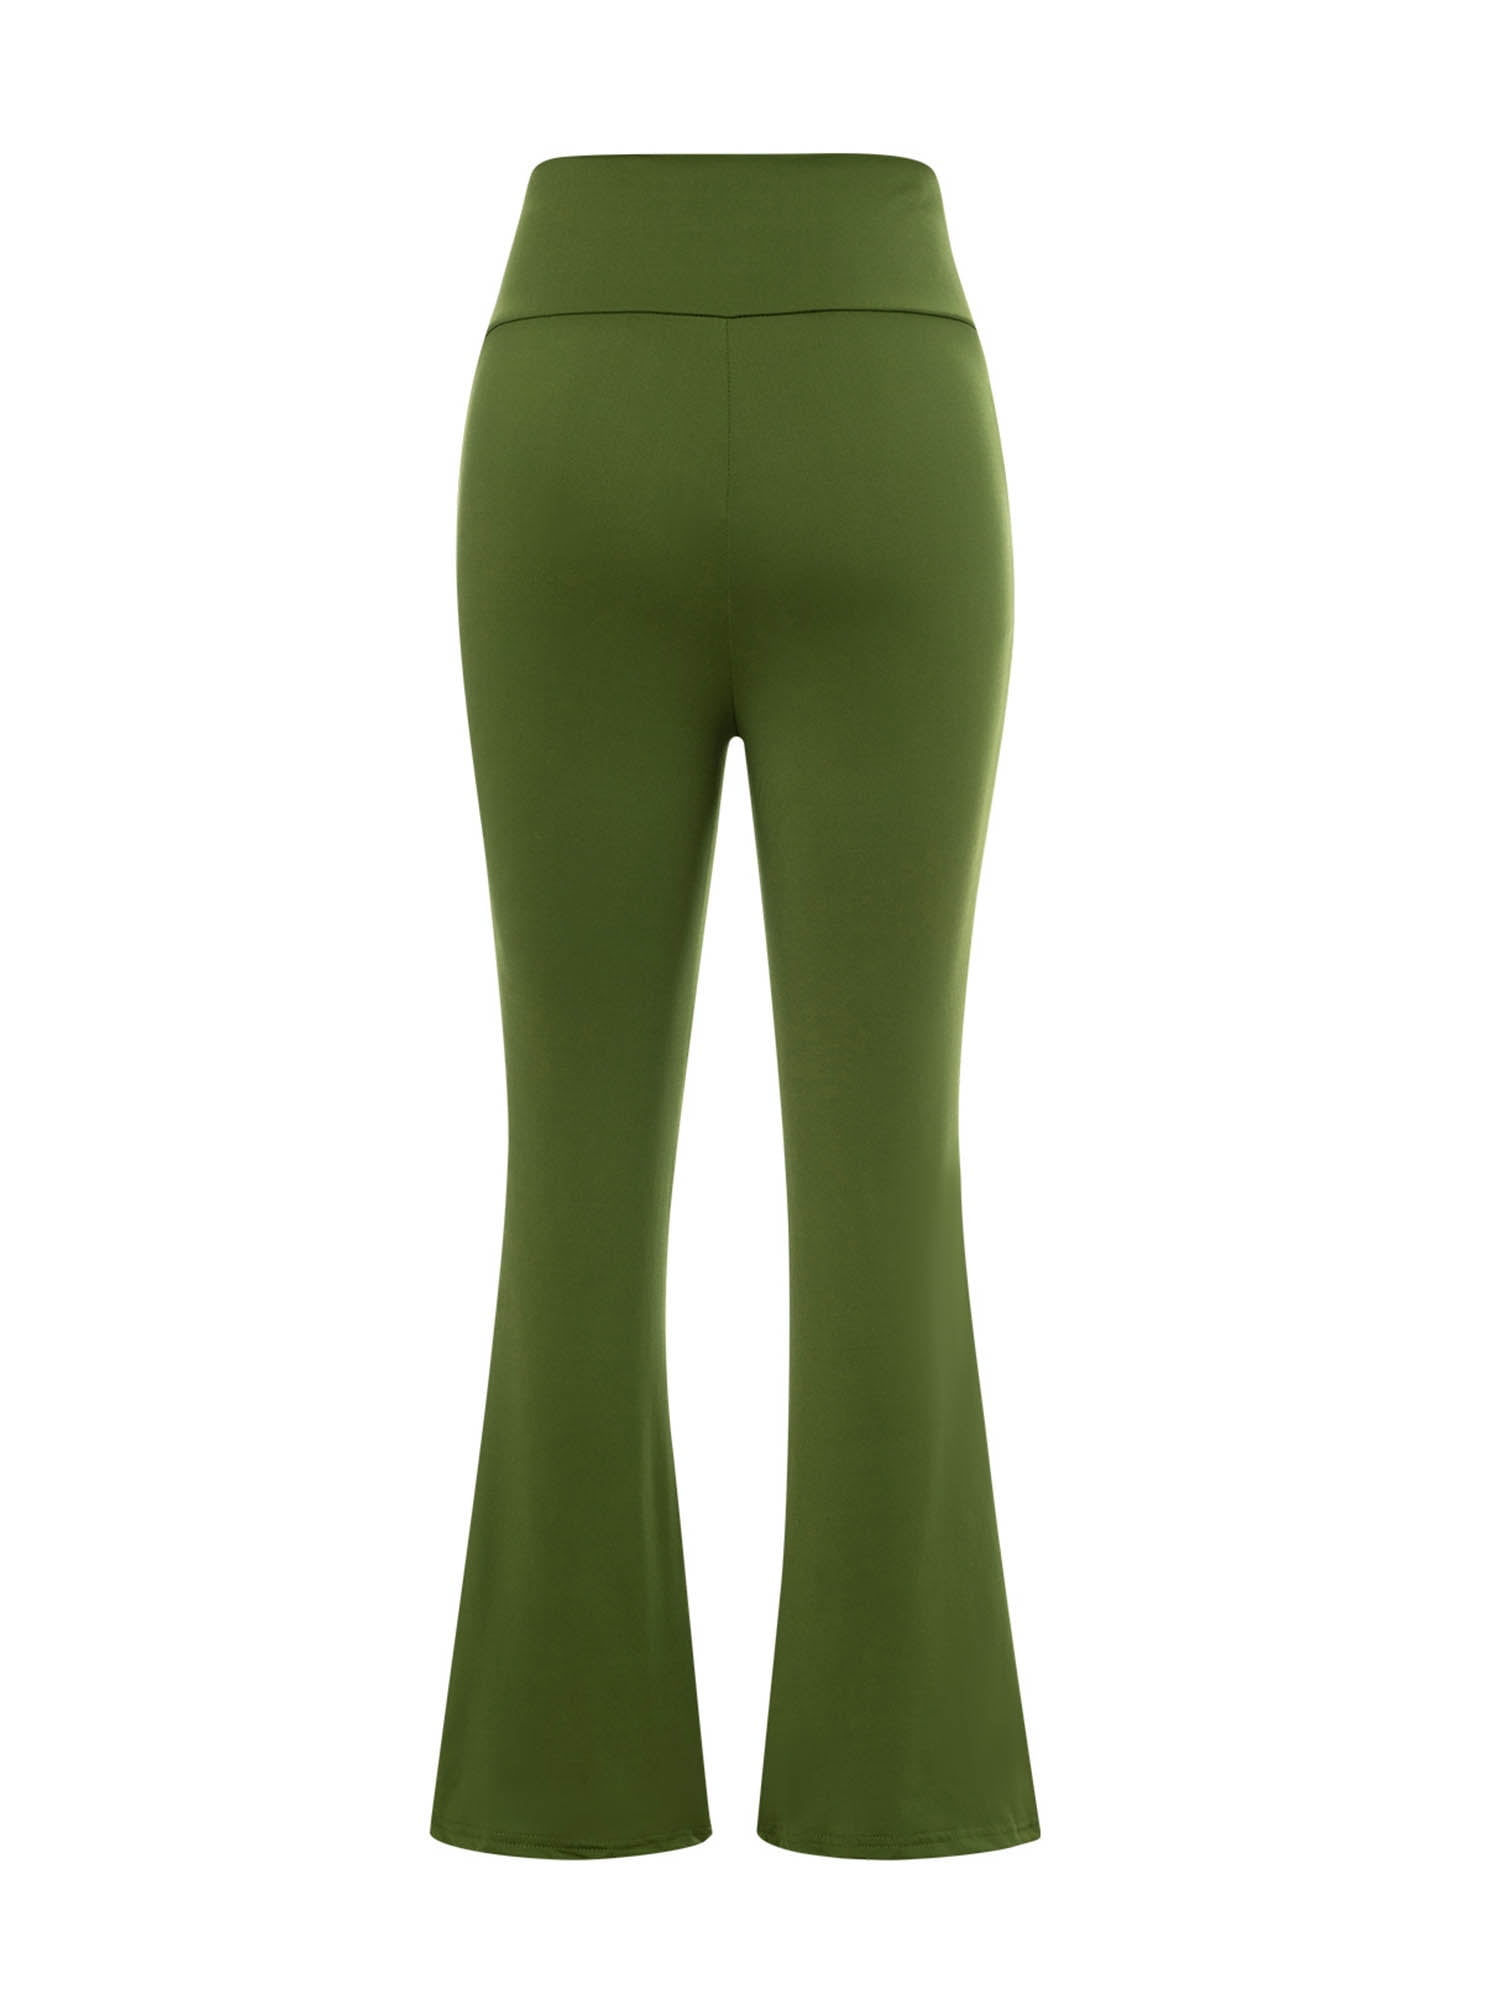 TOWED22 Yoga Pants for Women Women Yoga Pants High Waist Flare Leggings  Wide Straight Leg Sports Trousers Flared Trousers with Pocket(Green,M) 